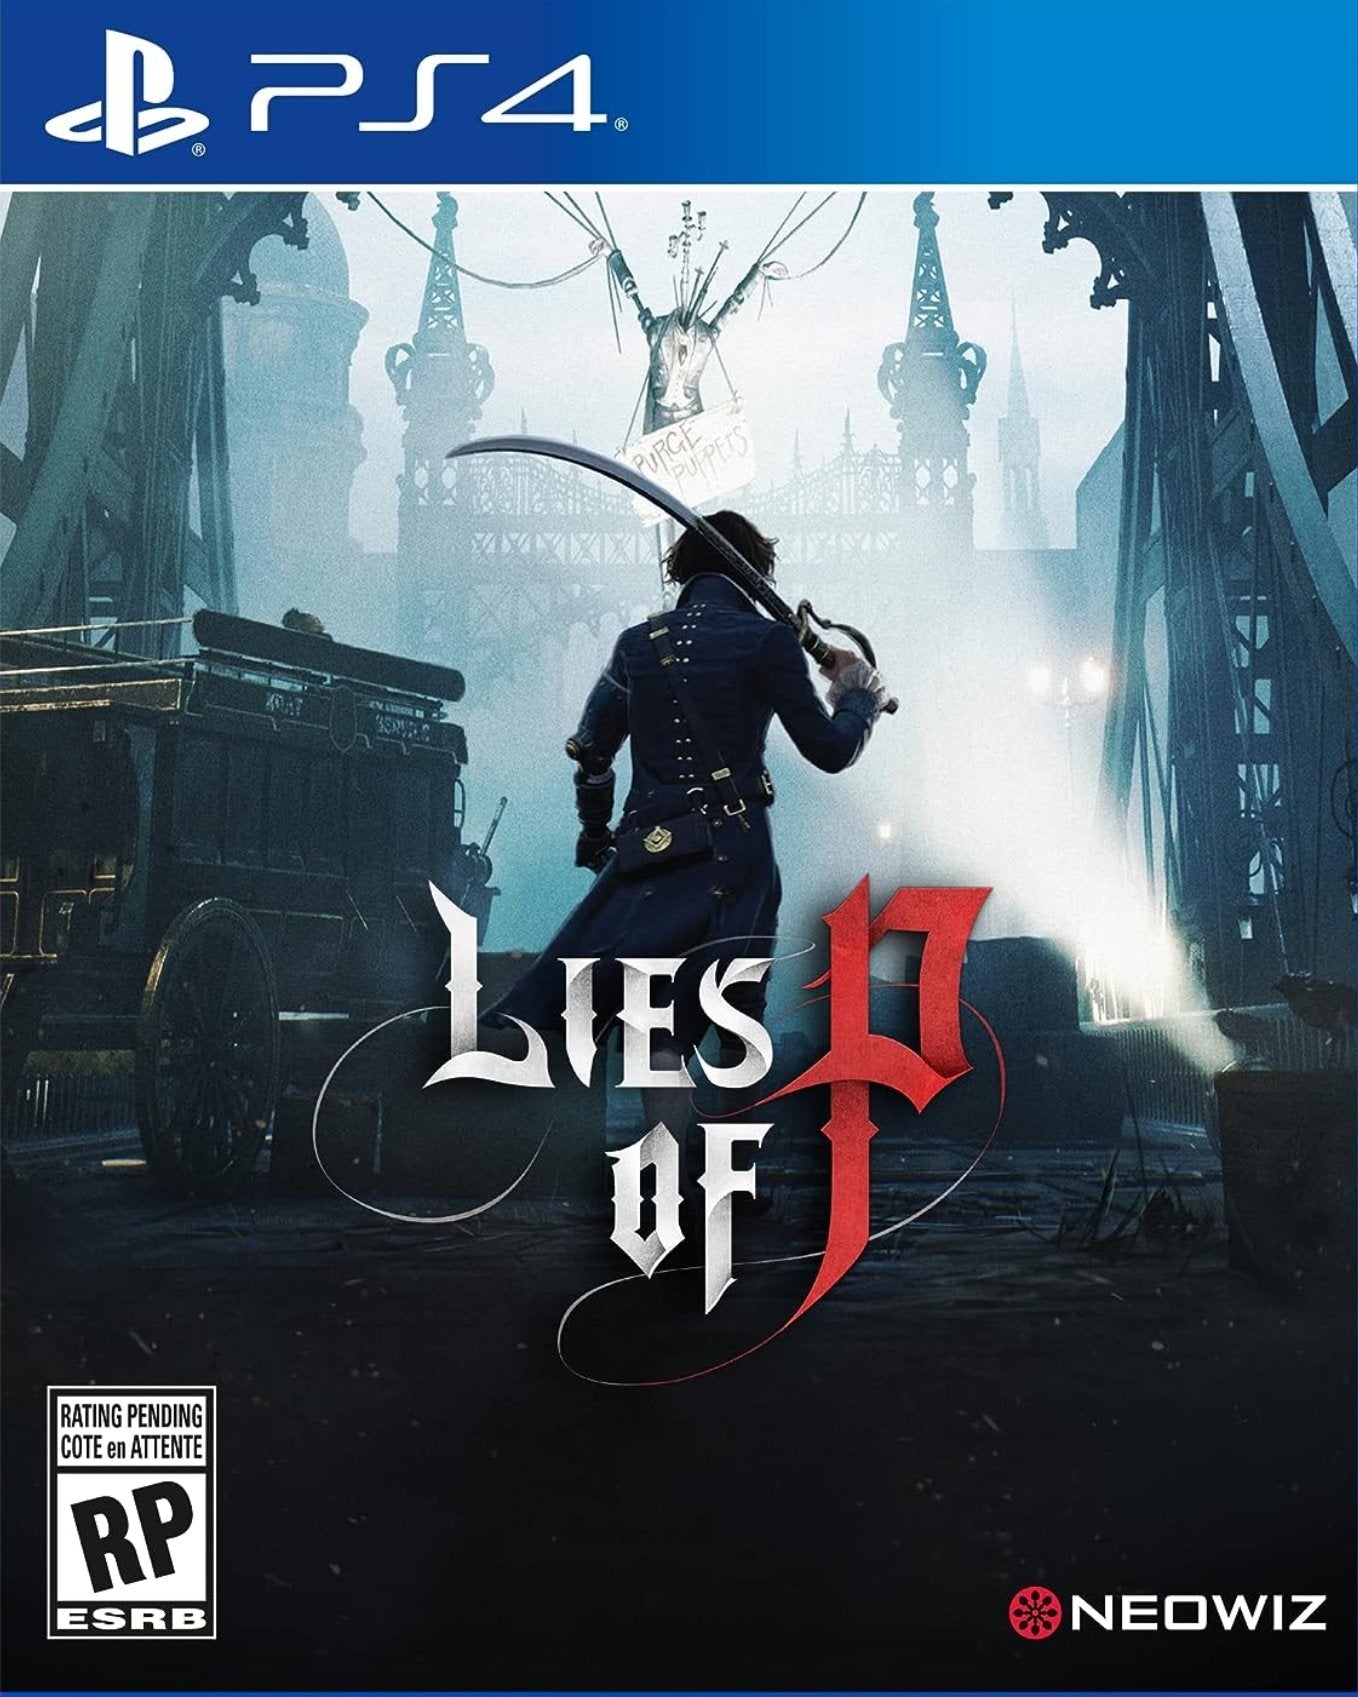 LIES OF P PS4 - EASY GAMES